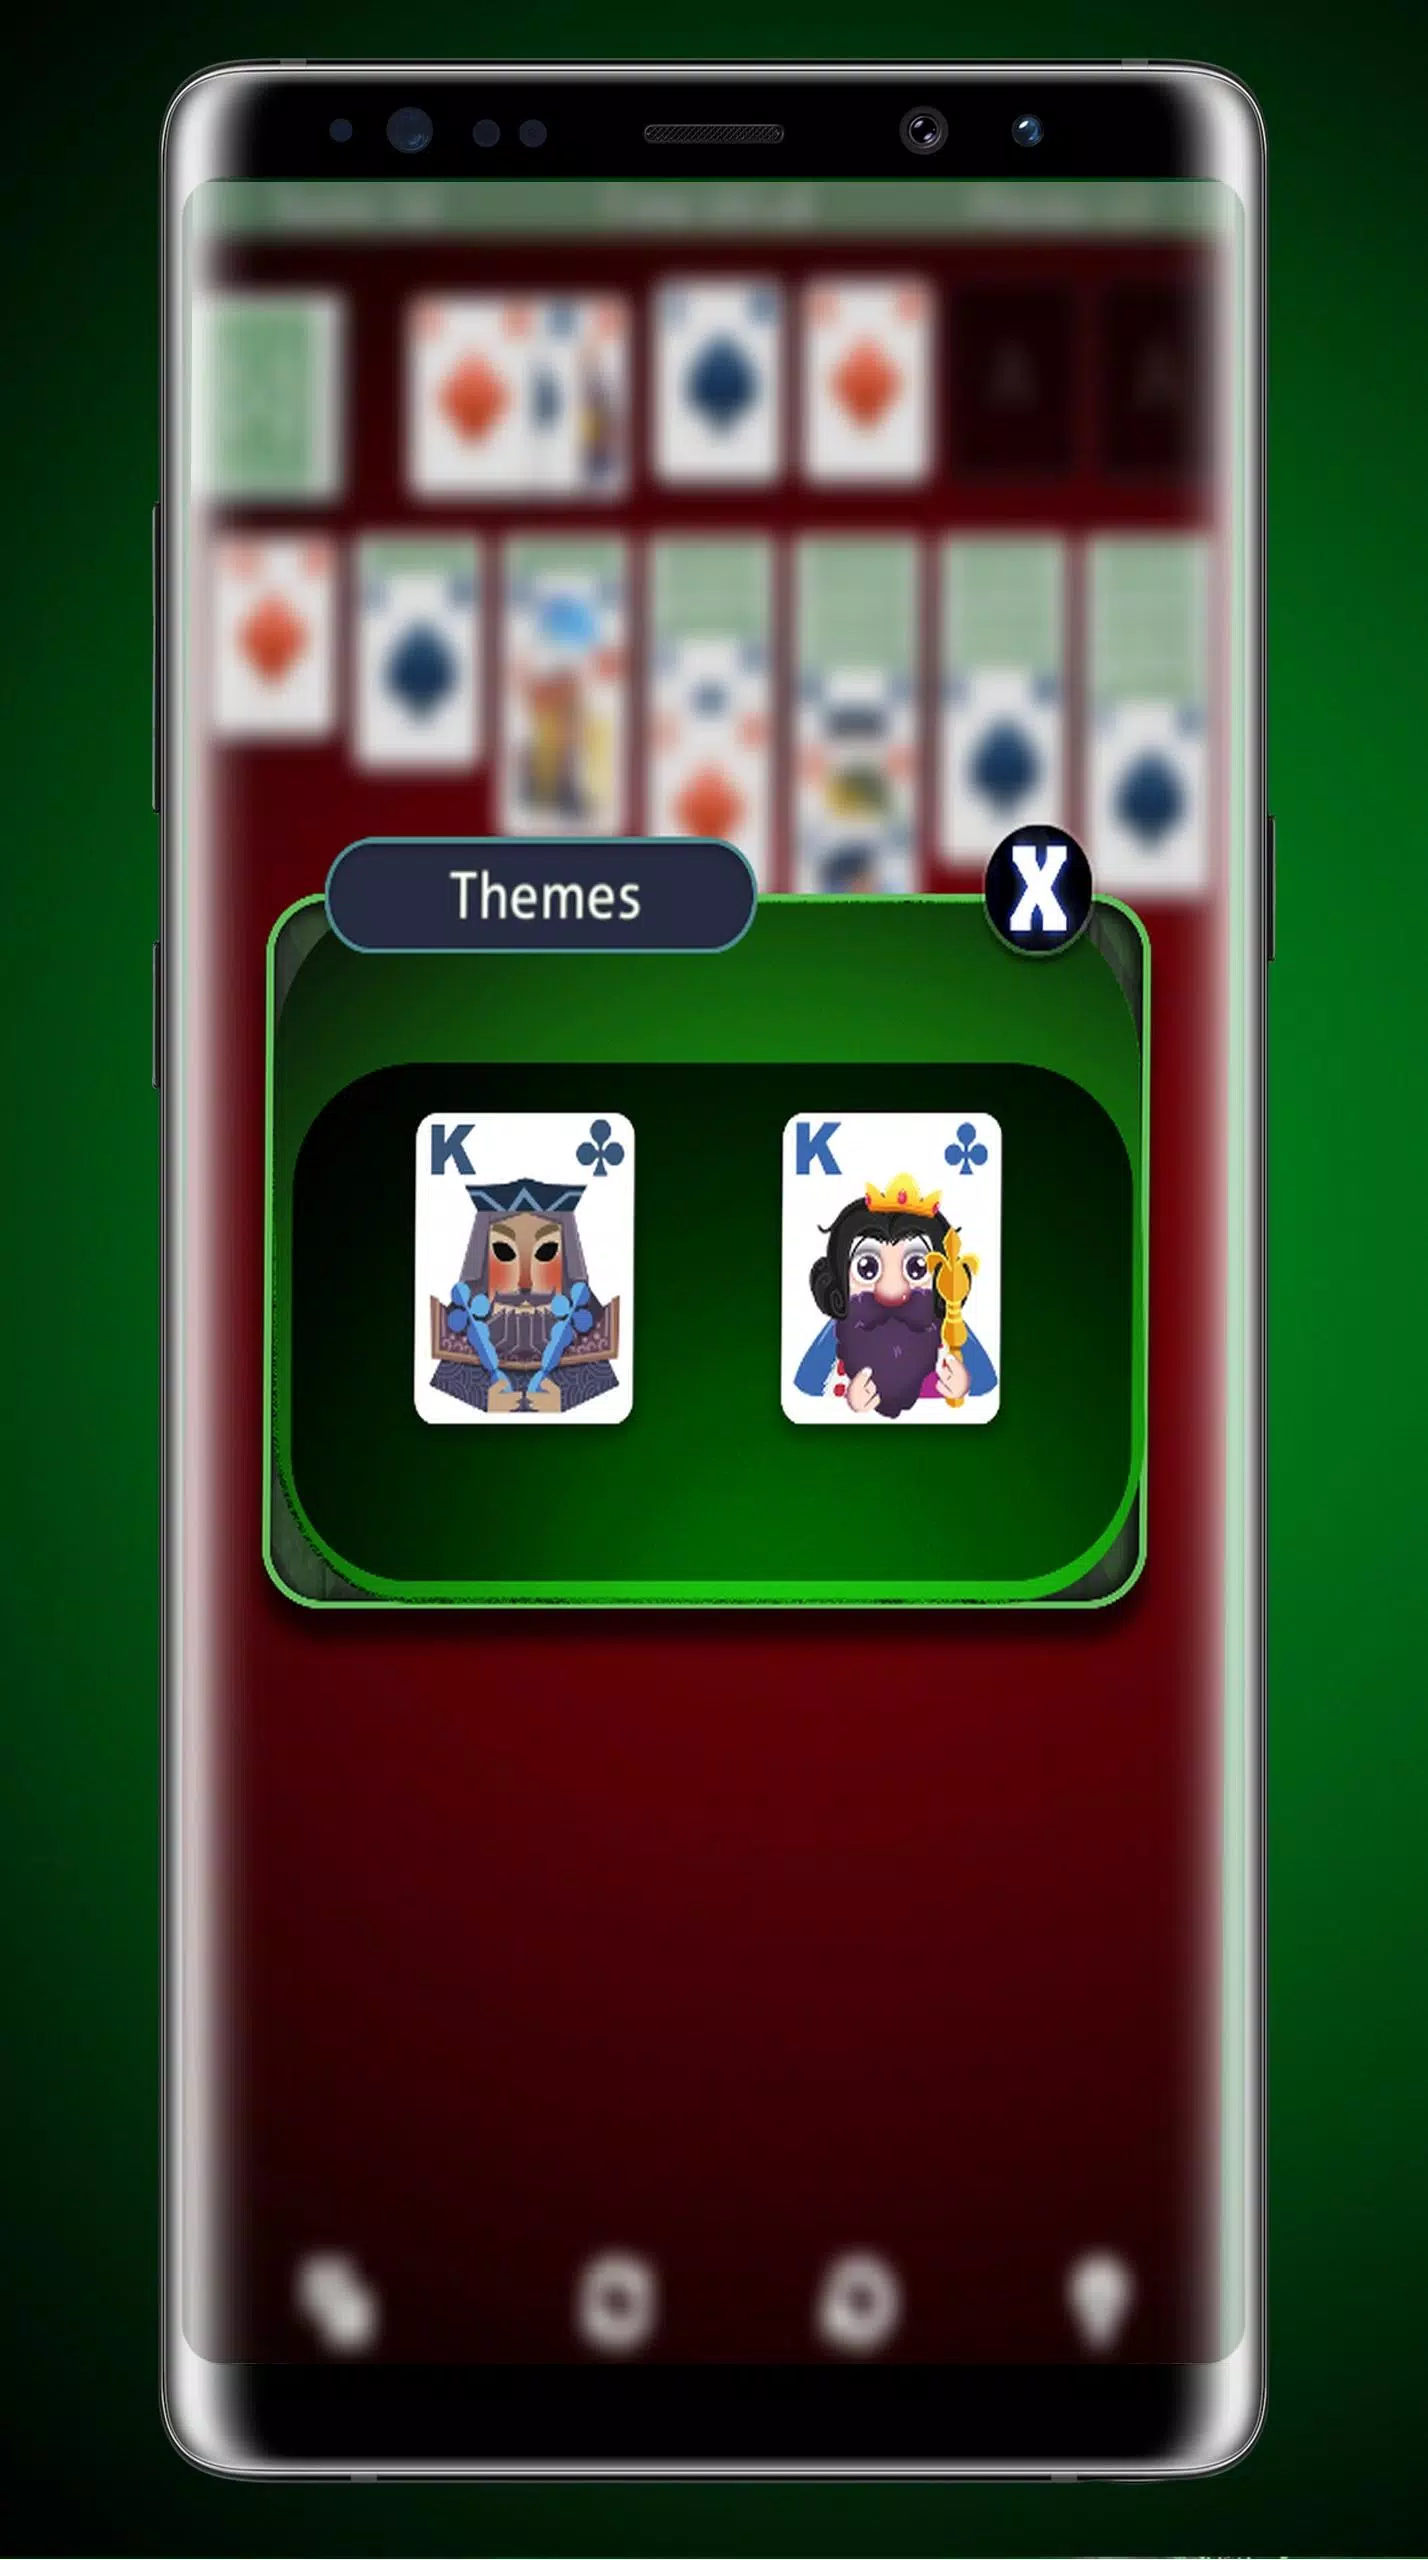 solitaire classic gratis for Android - APK Download